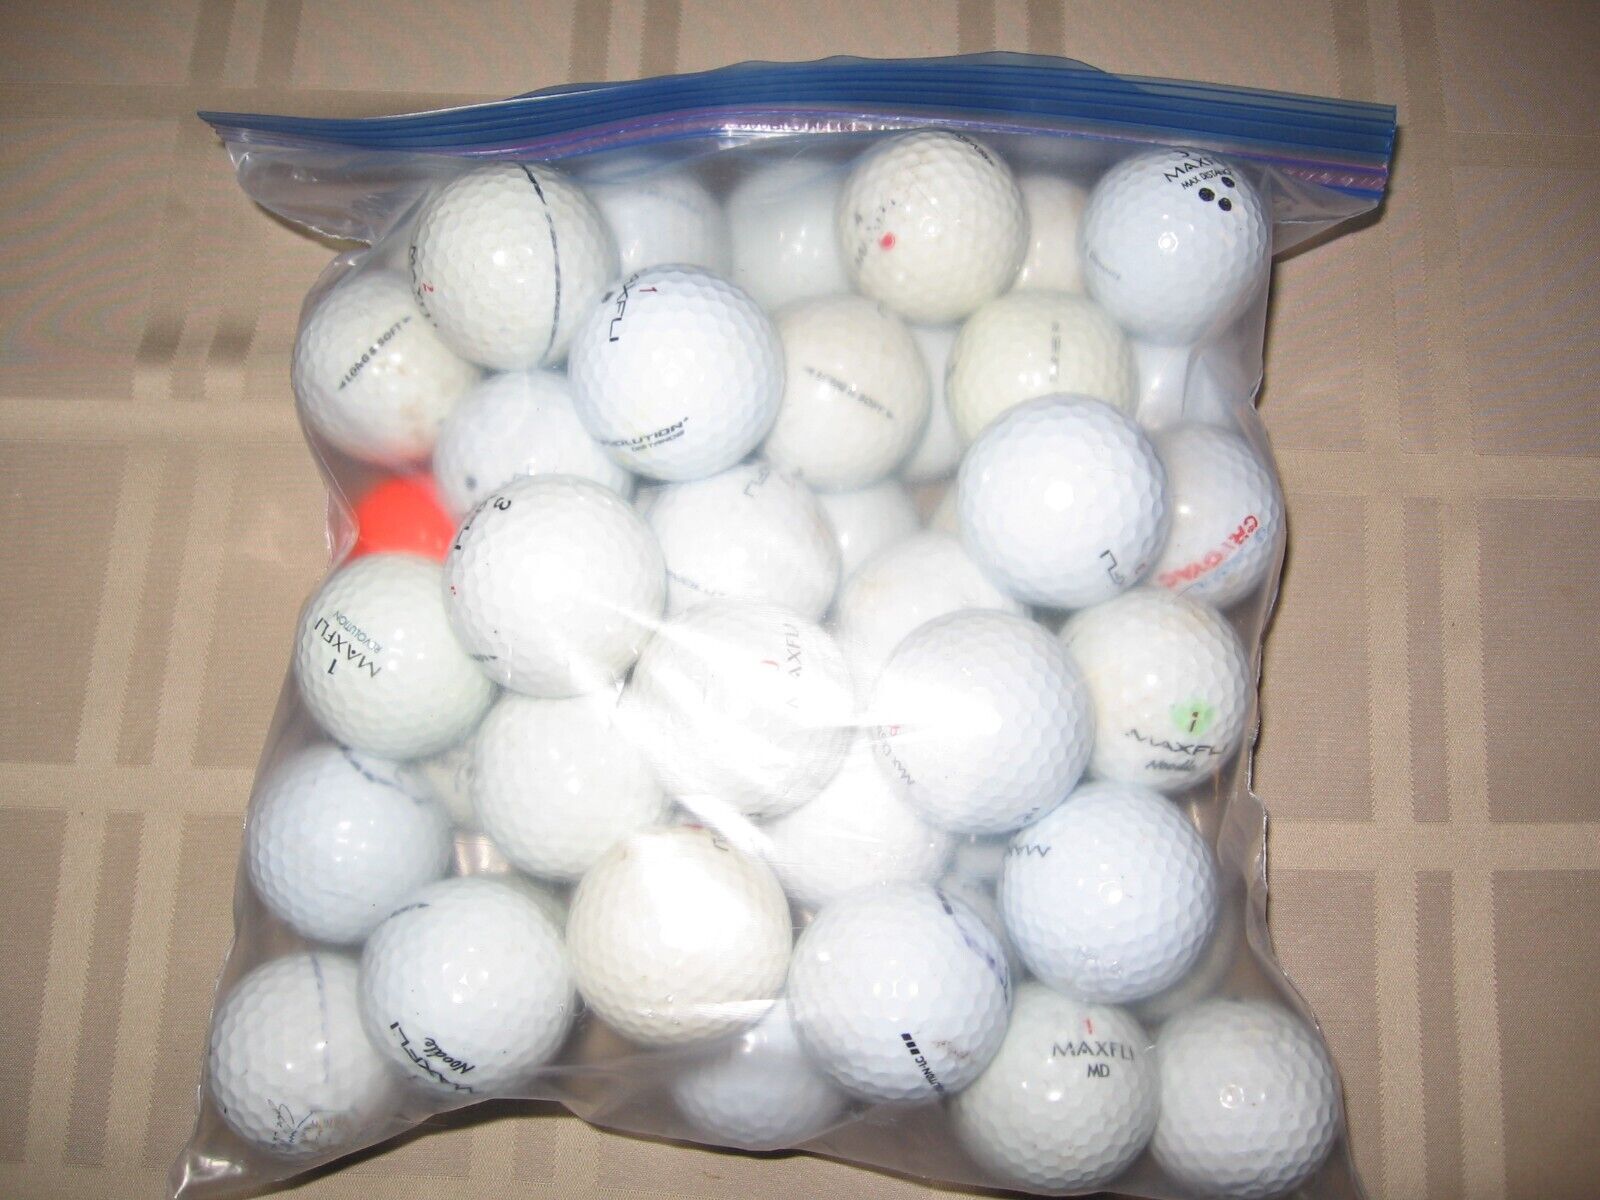 25 lightly used Max-Fli golf balls.  Great condition.